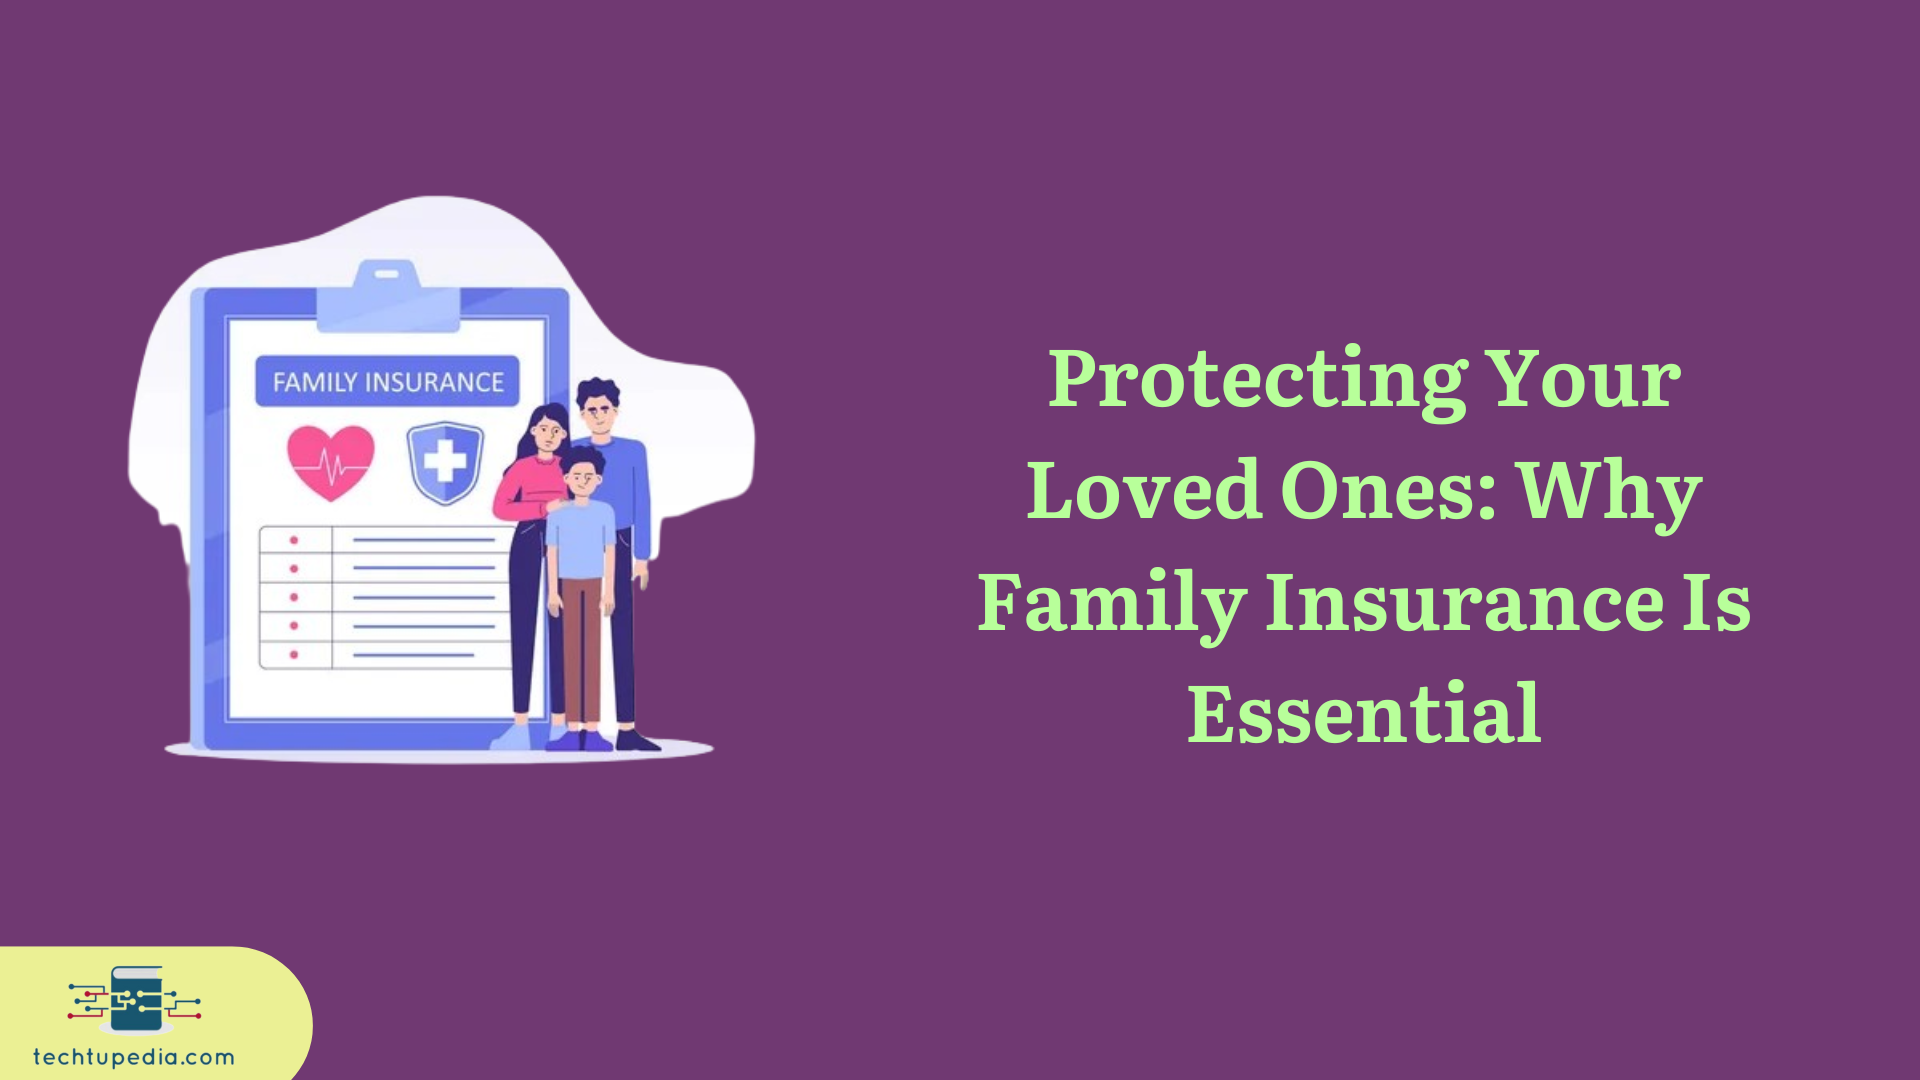 Protecting Your Loved Ones: Why Family Insurance Is Essential